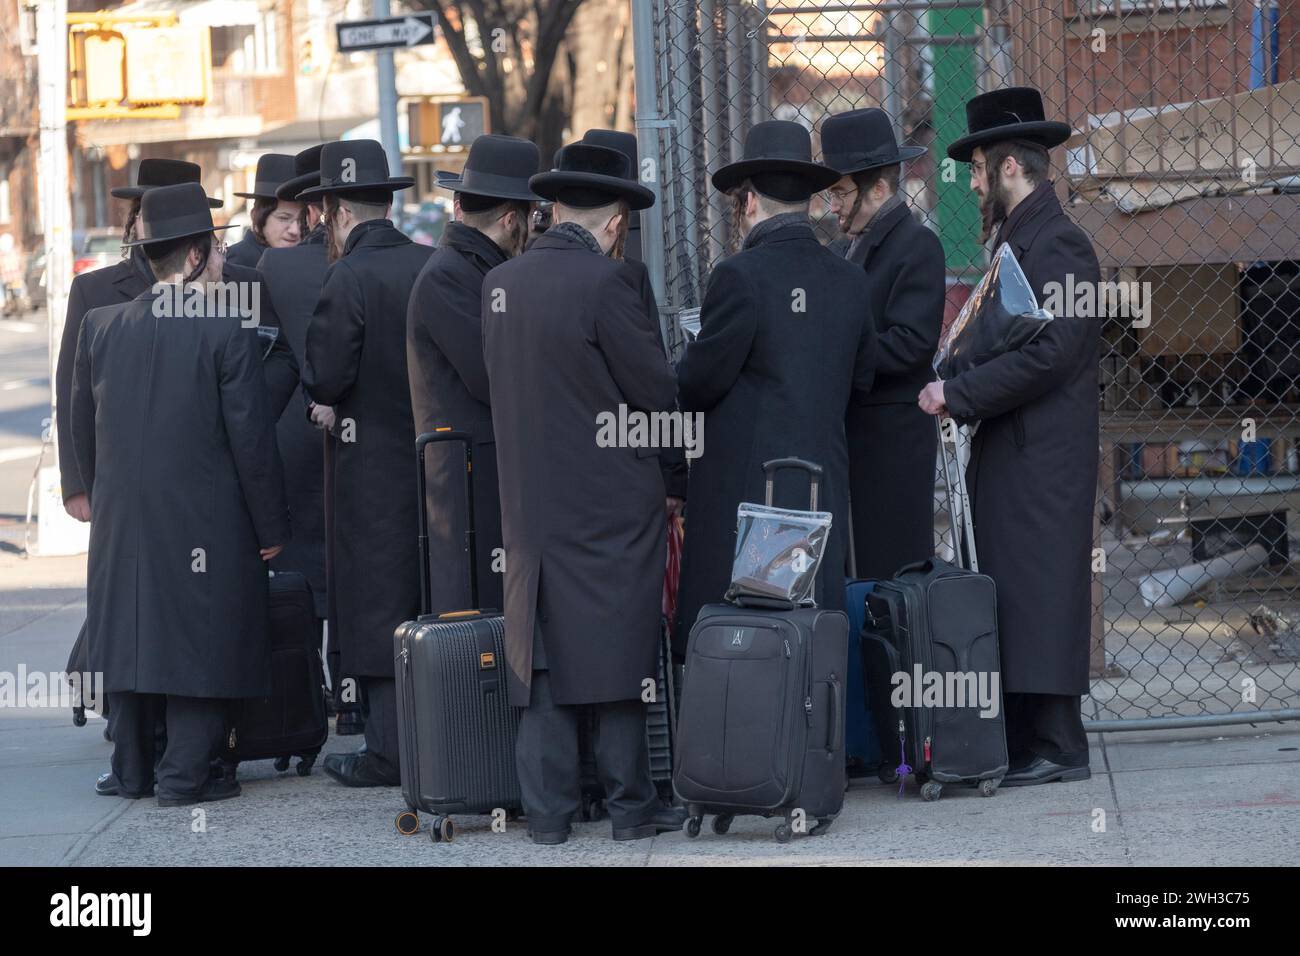 On a cold winter day, a group of Satmar orthodox Jews wait for a bus to take them to a Talmud studies class in another part of Brooklyn, New York. Stock Photo